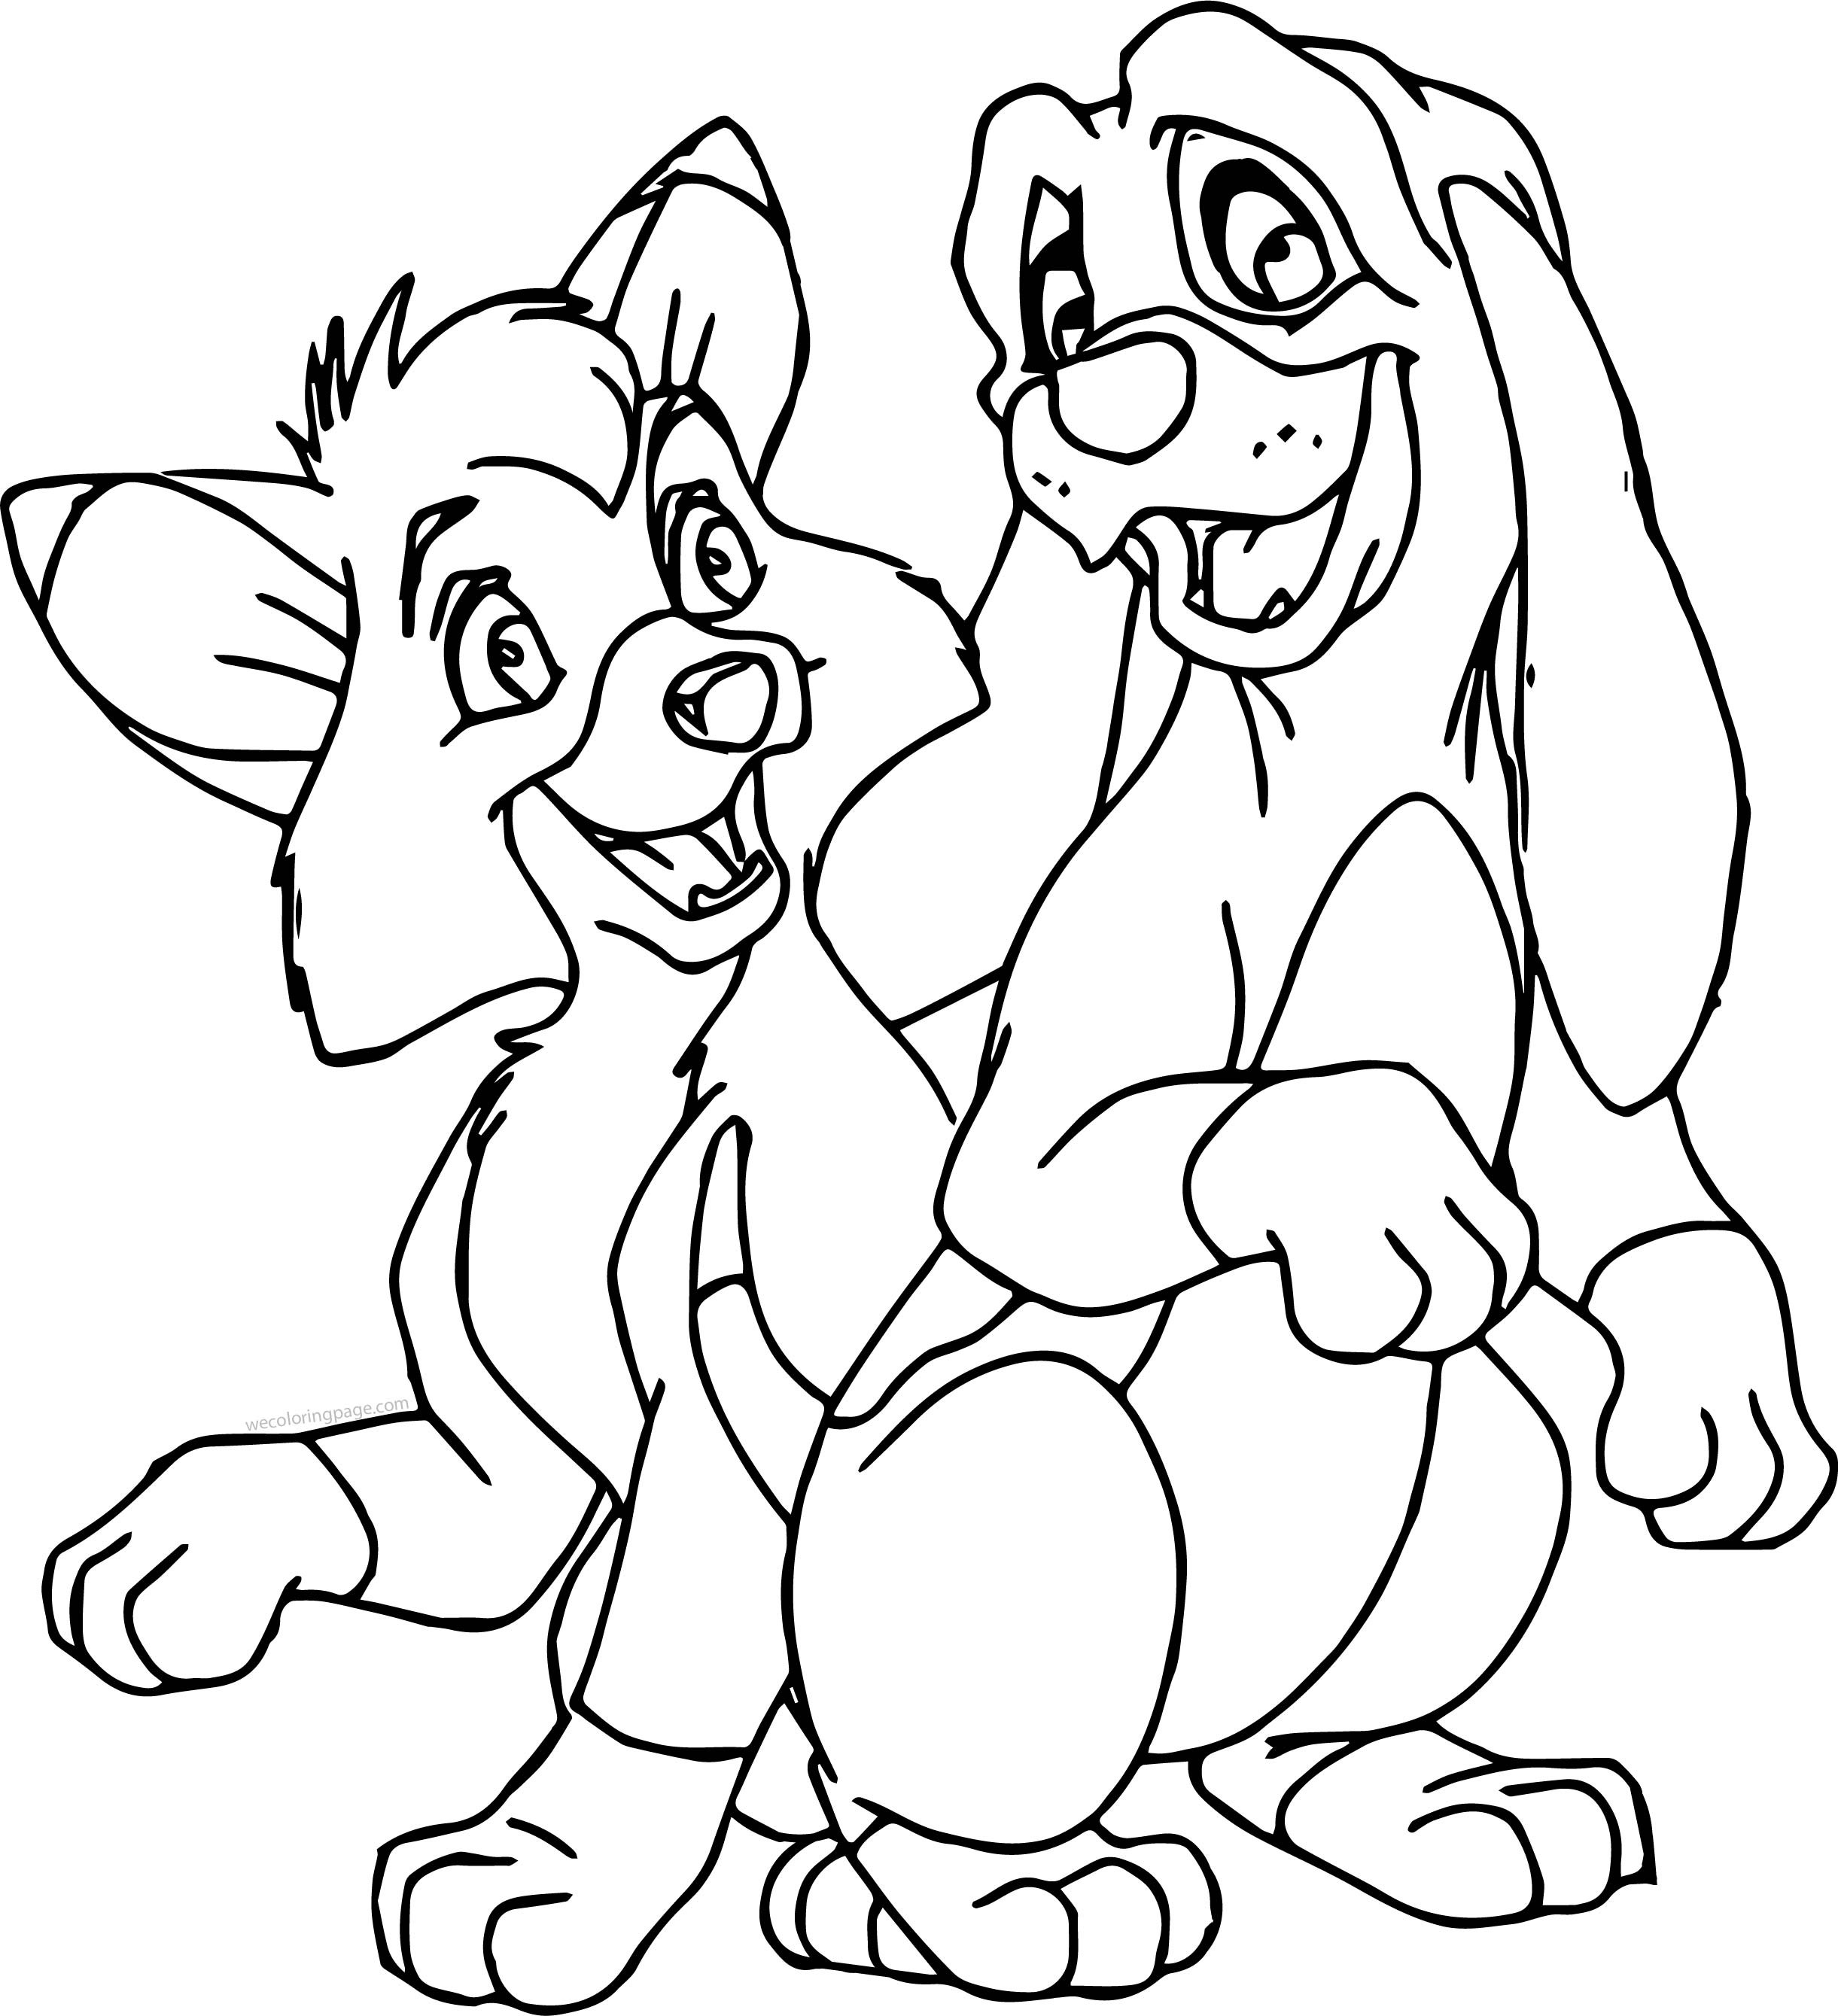 Fox And The Hound Coloring Pages
 Copper Todd Fox Happy Cartoon Coloring Page